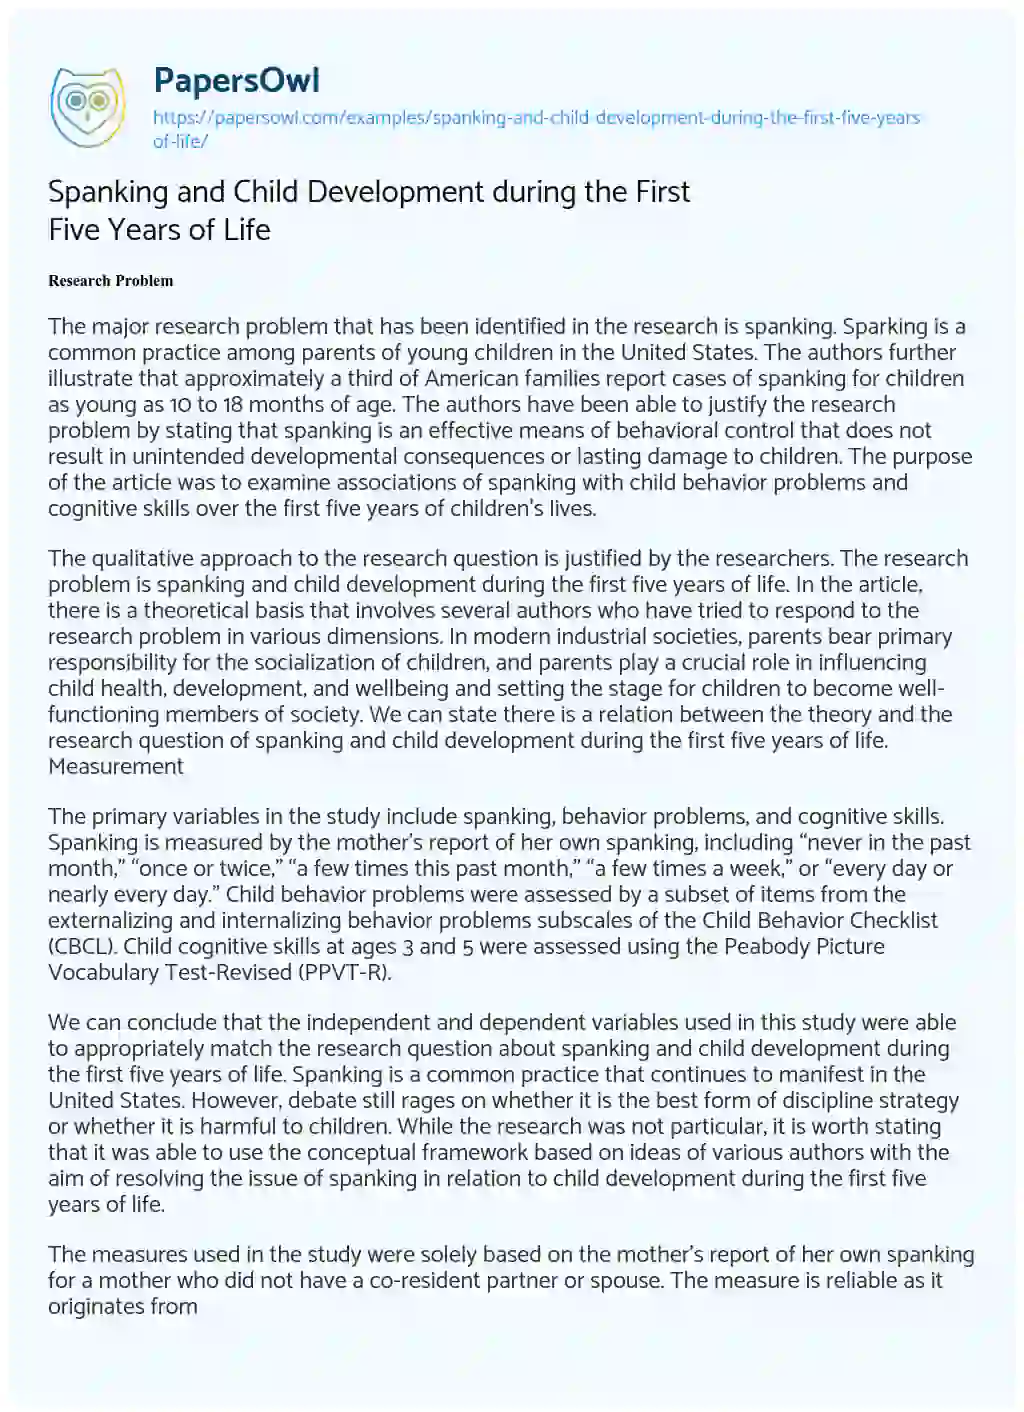 Essay on Spanking and Child Development during the First Five Years of Life